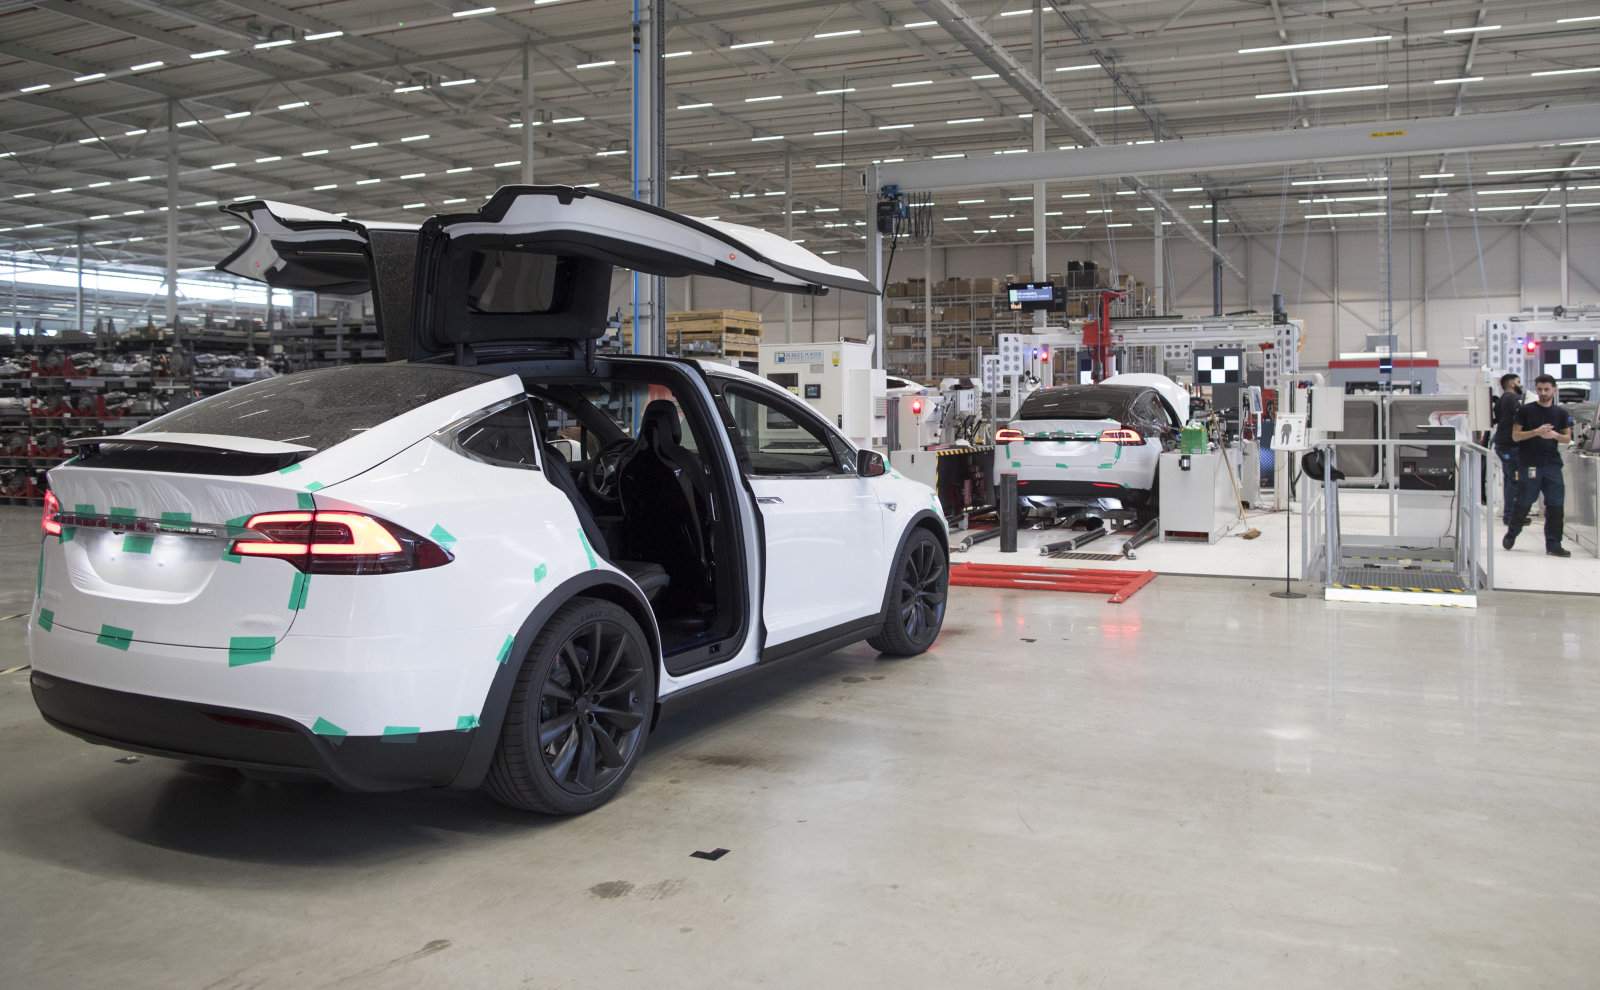 The rear gull wing doors of a Tesla Model X sports utility vehicle (SUV) sit open during assembly for the European market at the Tesla Motors Inc. factory in Tilburg, Netherlands, on Friday, Dec. 9, 2016. A boom in electric vehicles made by the likes of Tesla could erode as much as 10 percent of global gasoline demand by 2035, according to the oil industry consultant Wood Mackenzie Ltd. Photographer: Jasper Juinen/Bloomberg via Getty Images